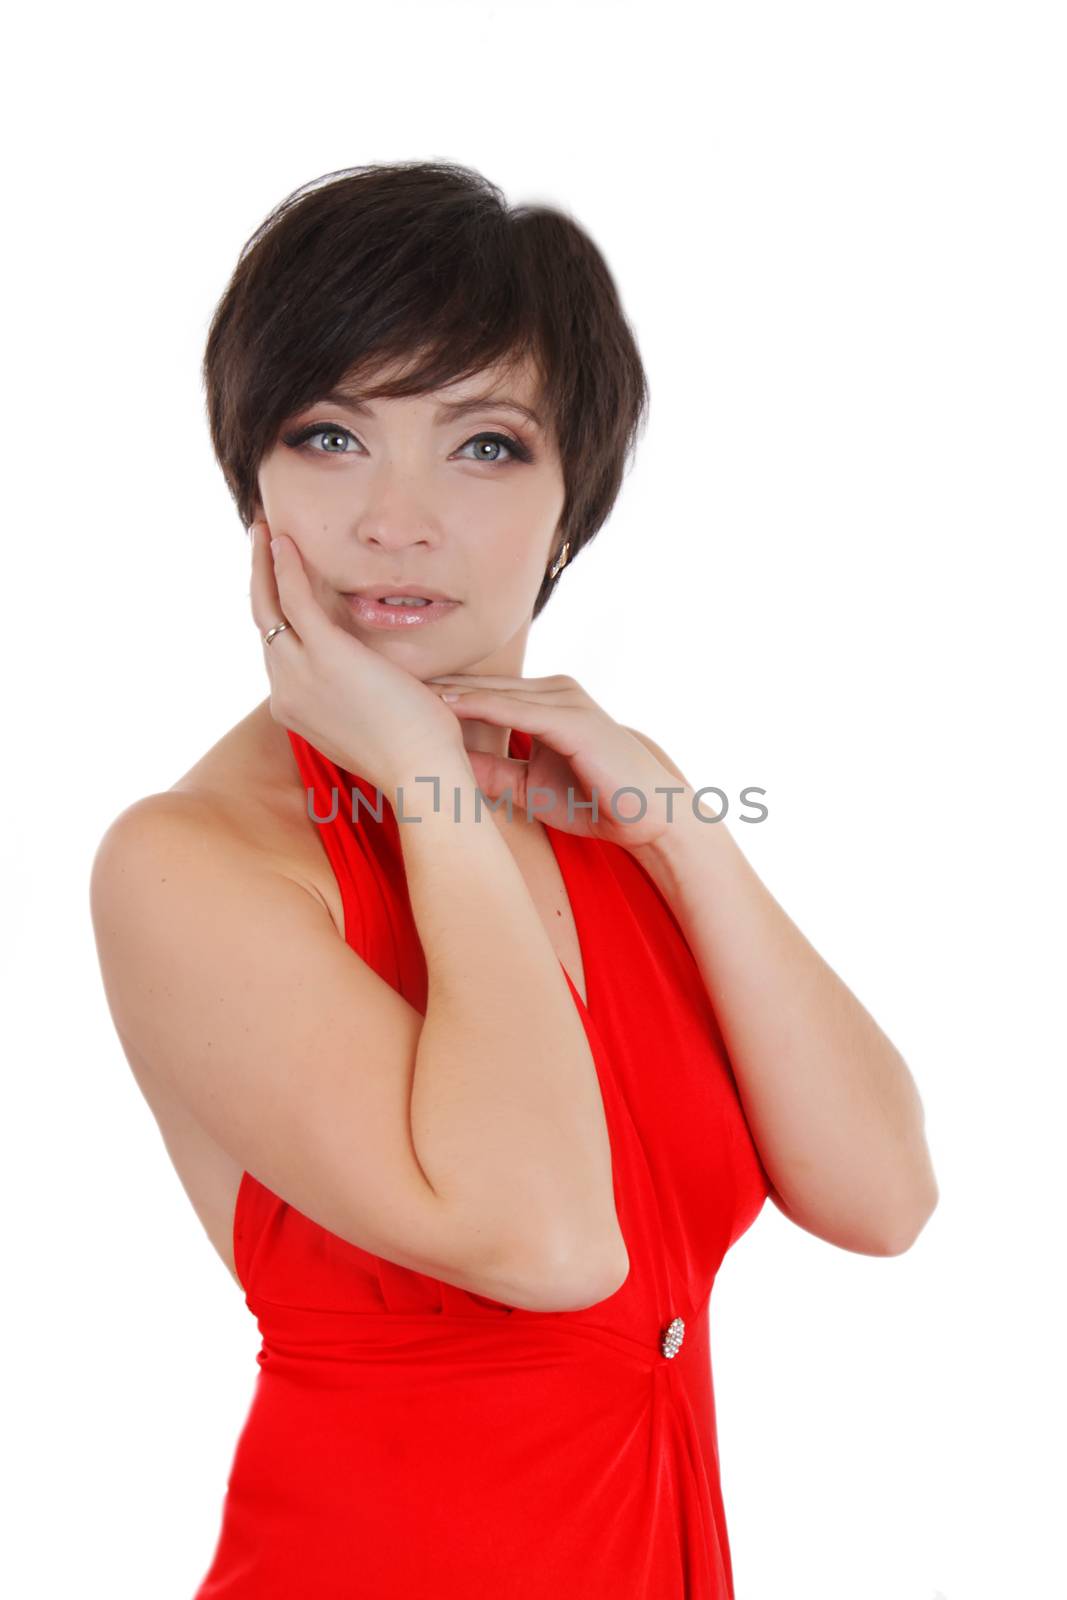 Elegant woman in red dress and make-up isolated on white